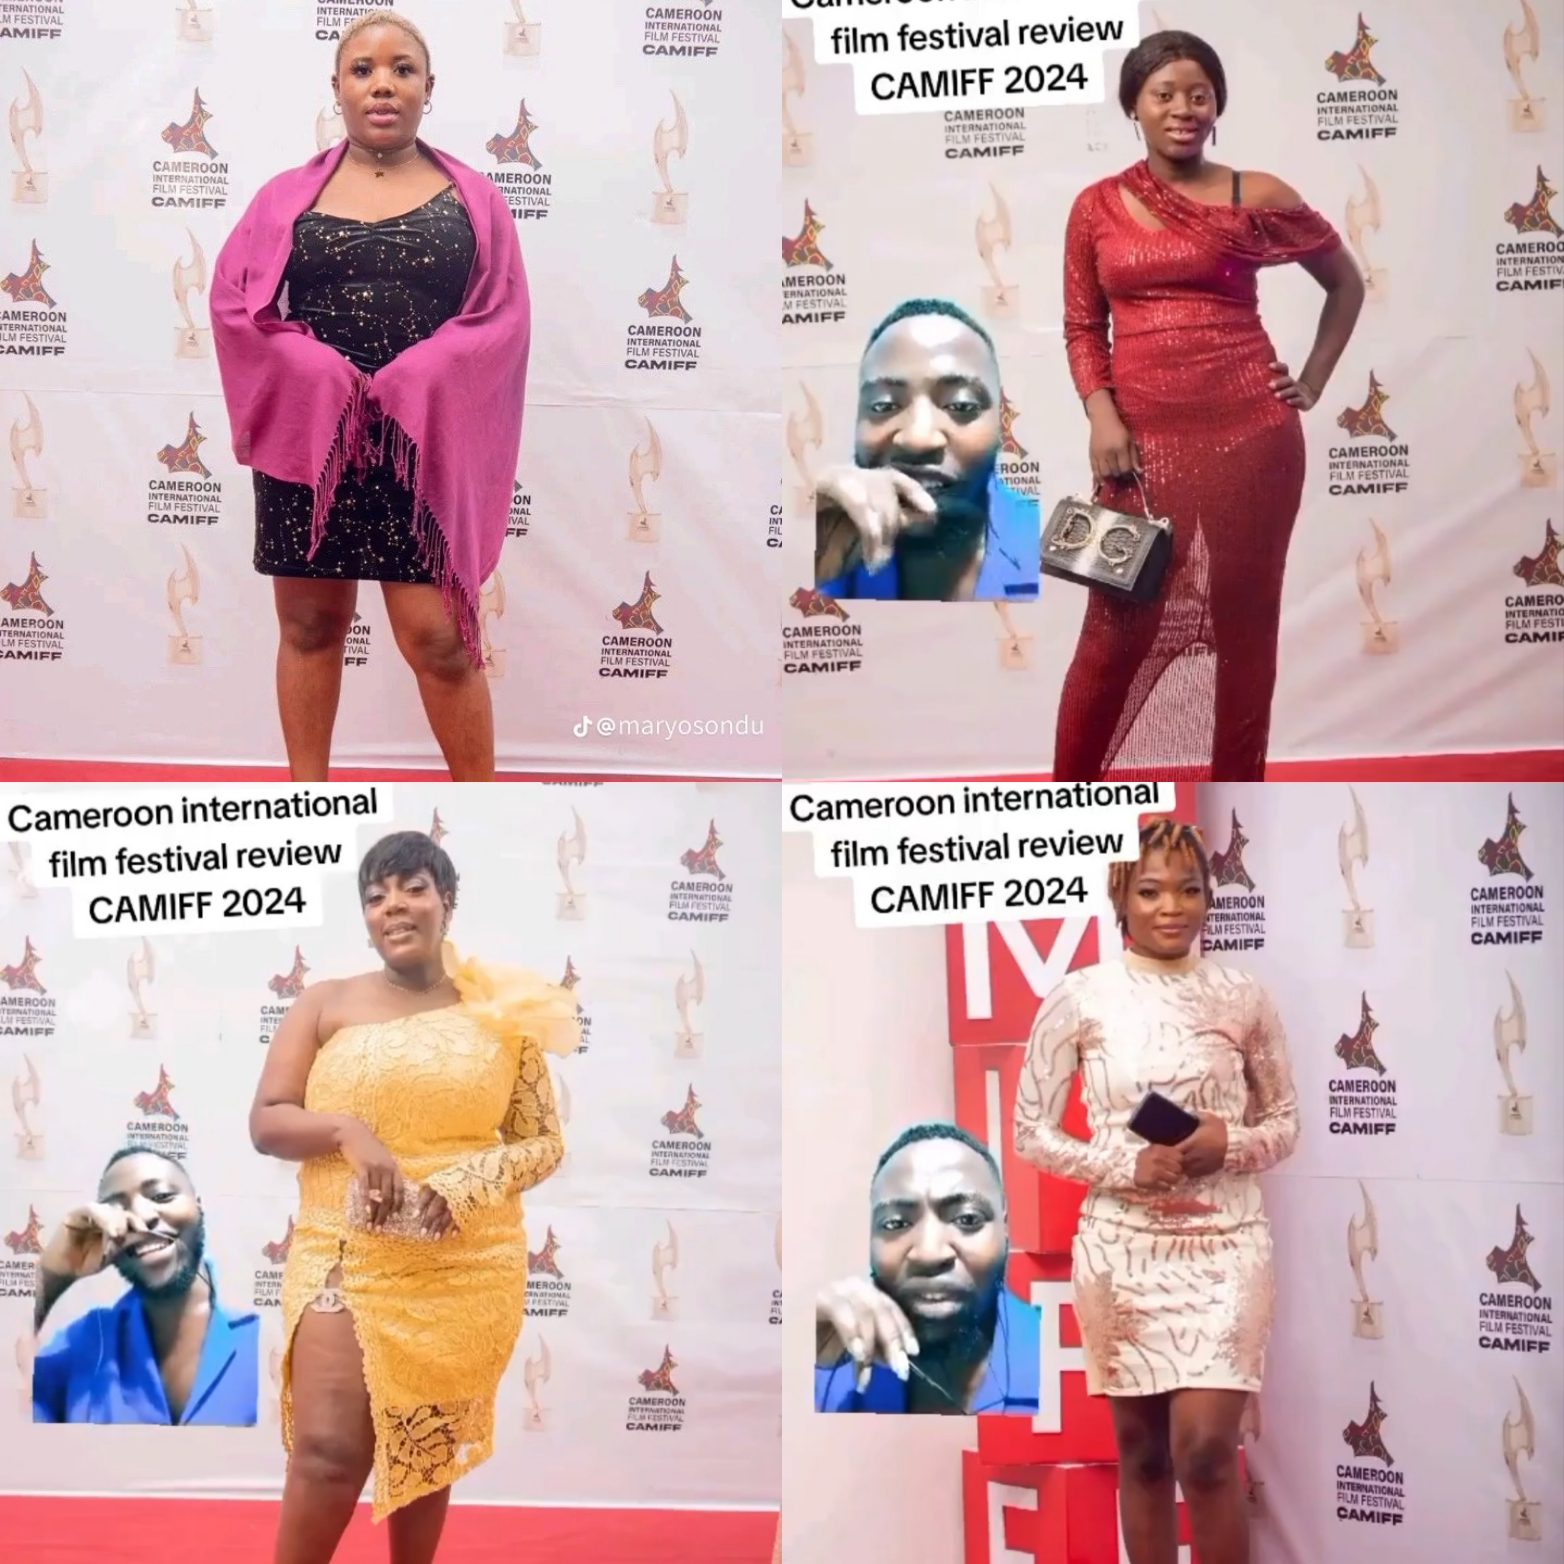 Celebrities’ fashion at the Cameroon International Film Festival 2024 sparks hilarious reactions (photos/video)